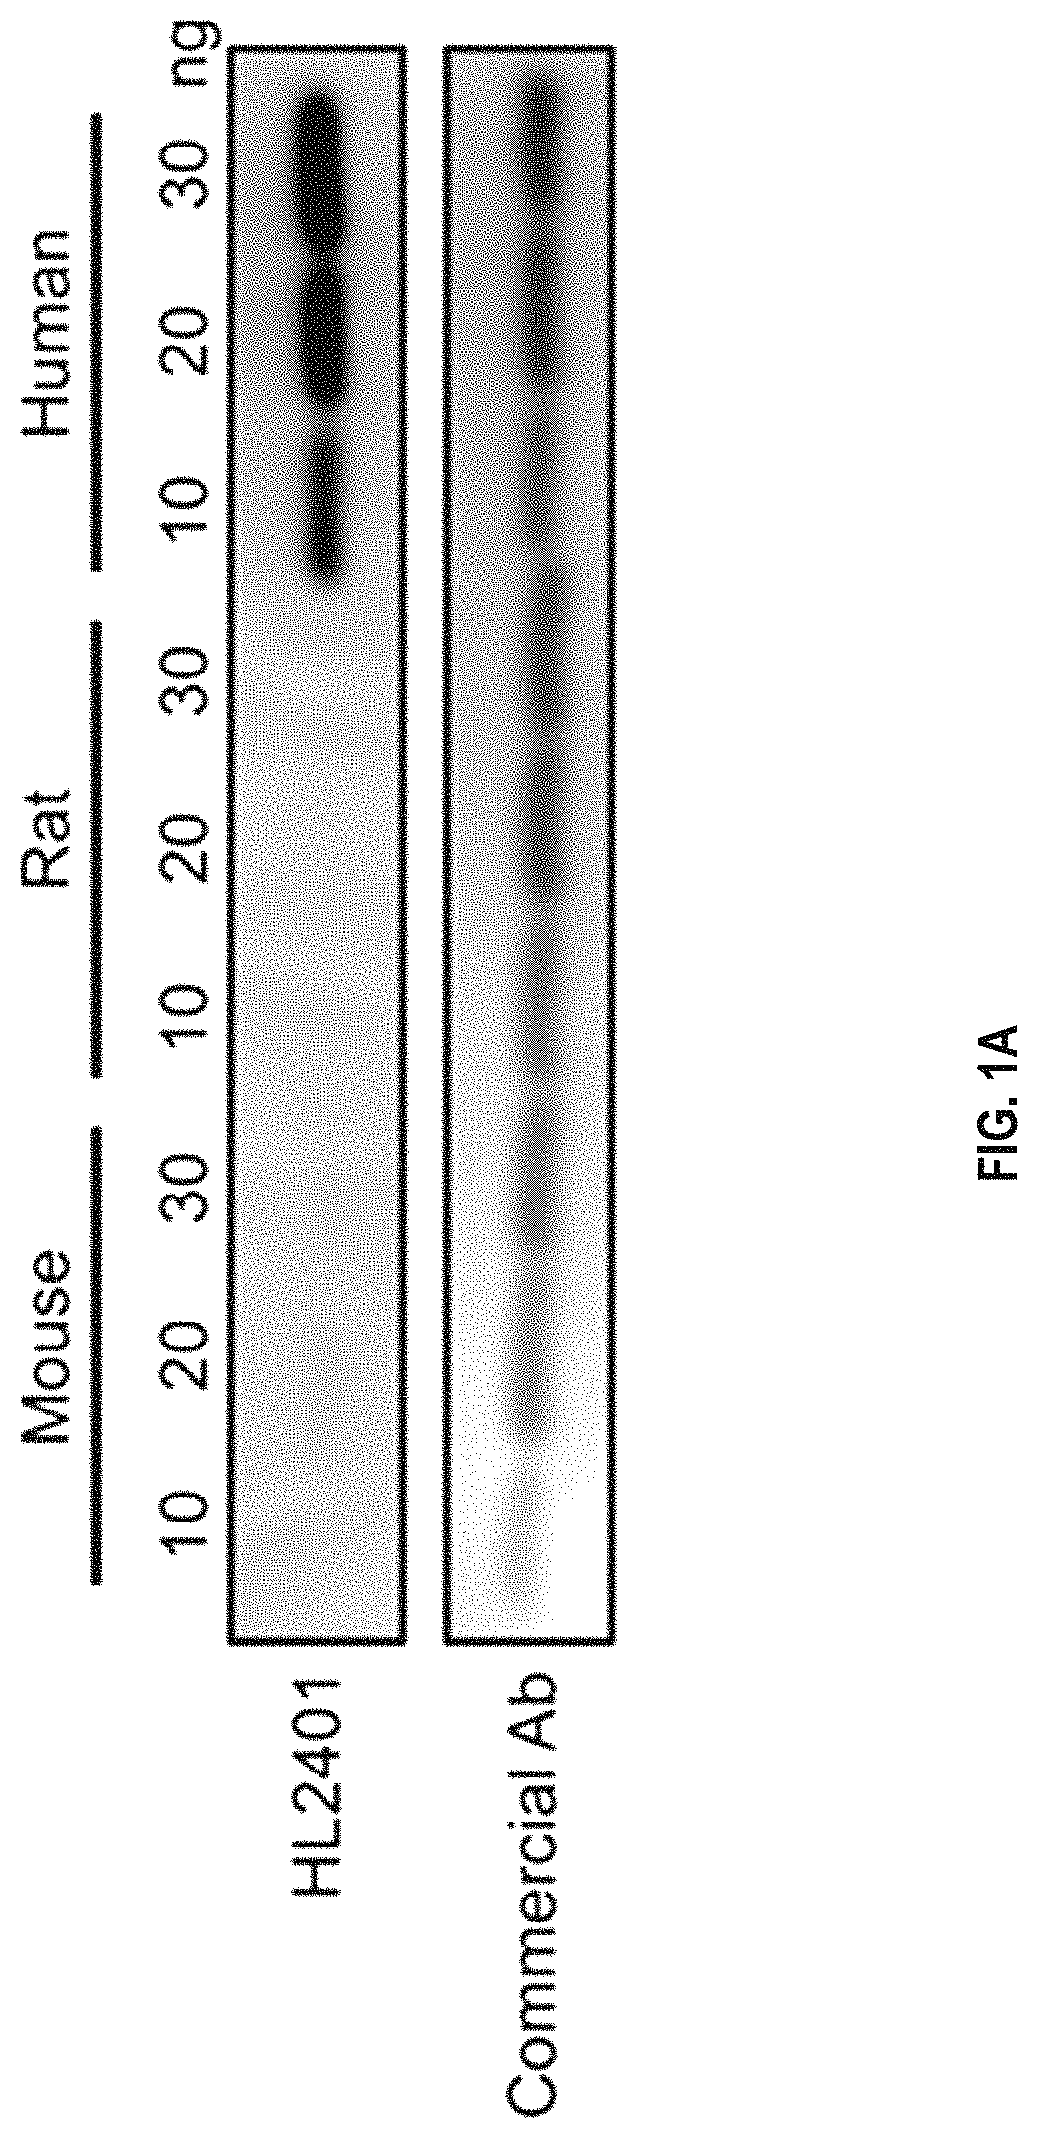 Compositions and methods for treatment of diseases involving CXCL1 function